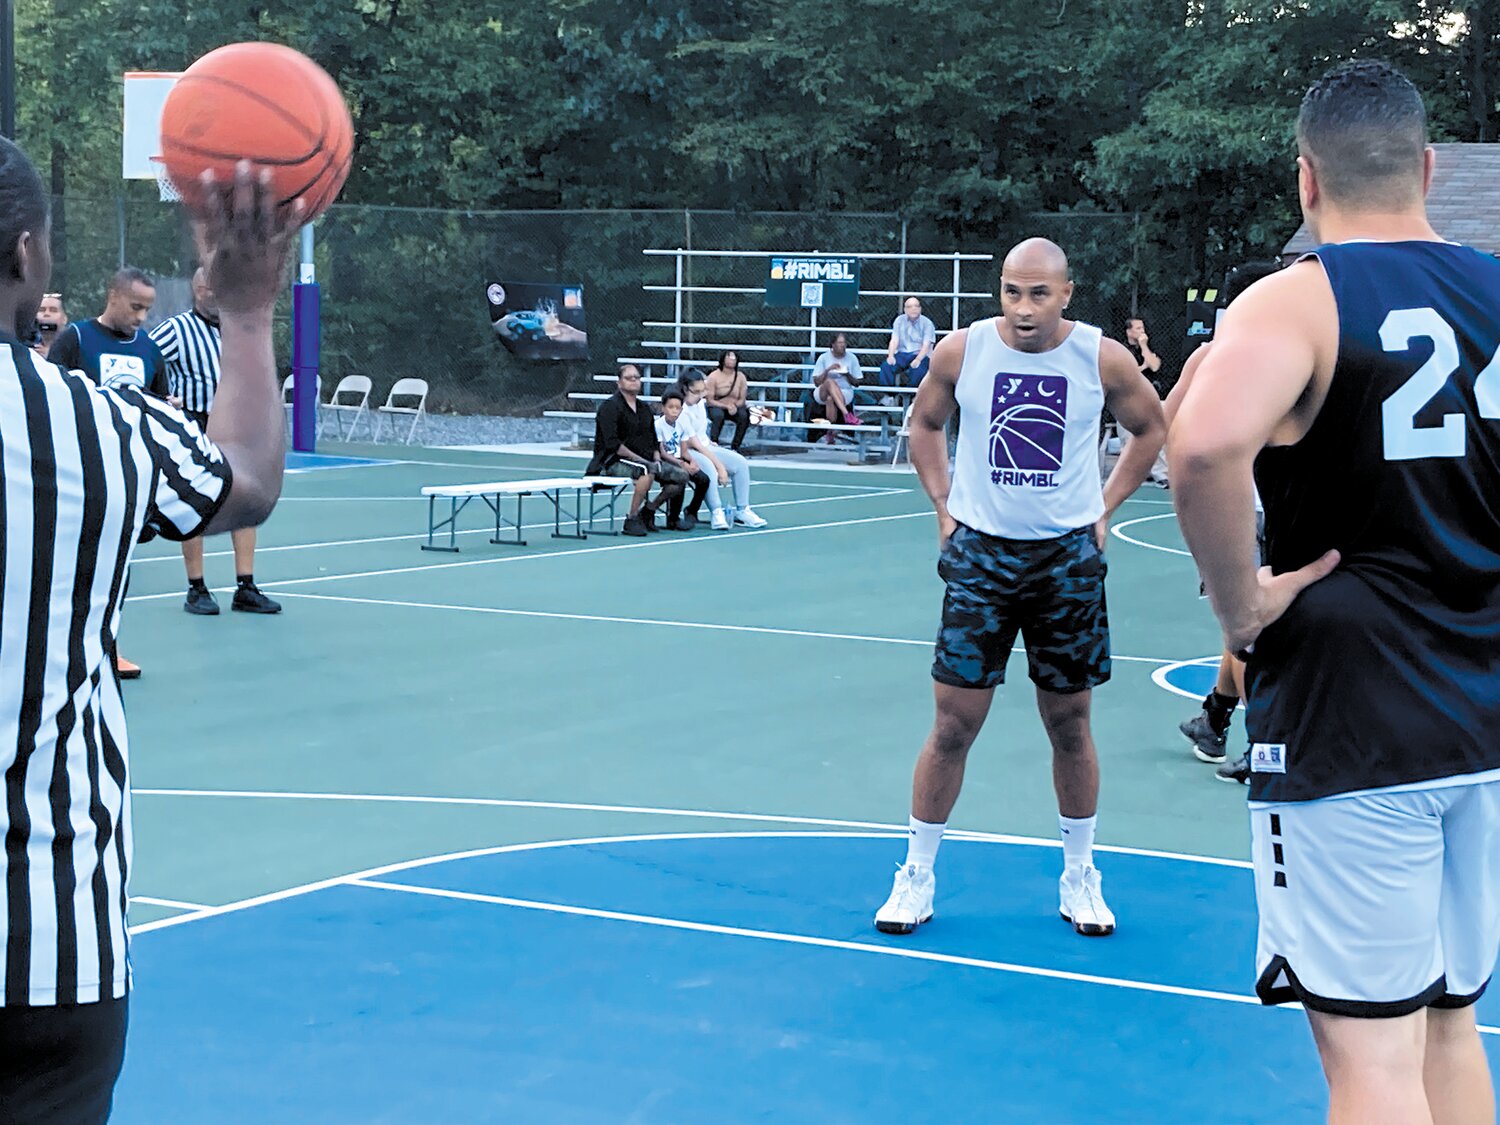 THE GAME’S MENTAL SIDE: East Providence firefighter Edson Evora, playing with the Rhode Island State Police team, prepares to shoot a free throw.